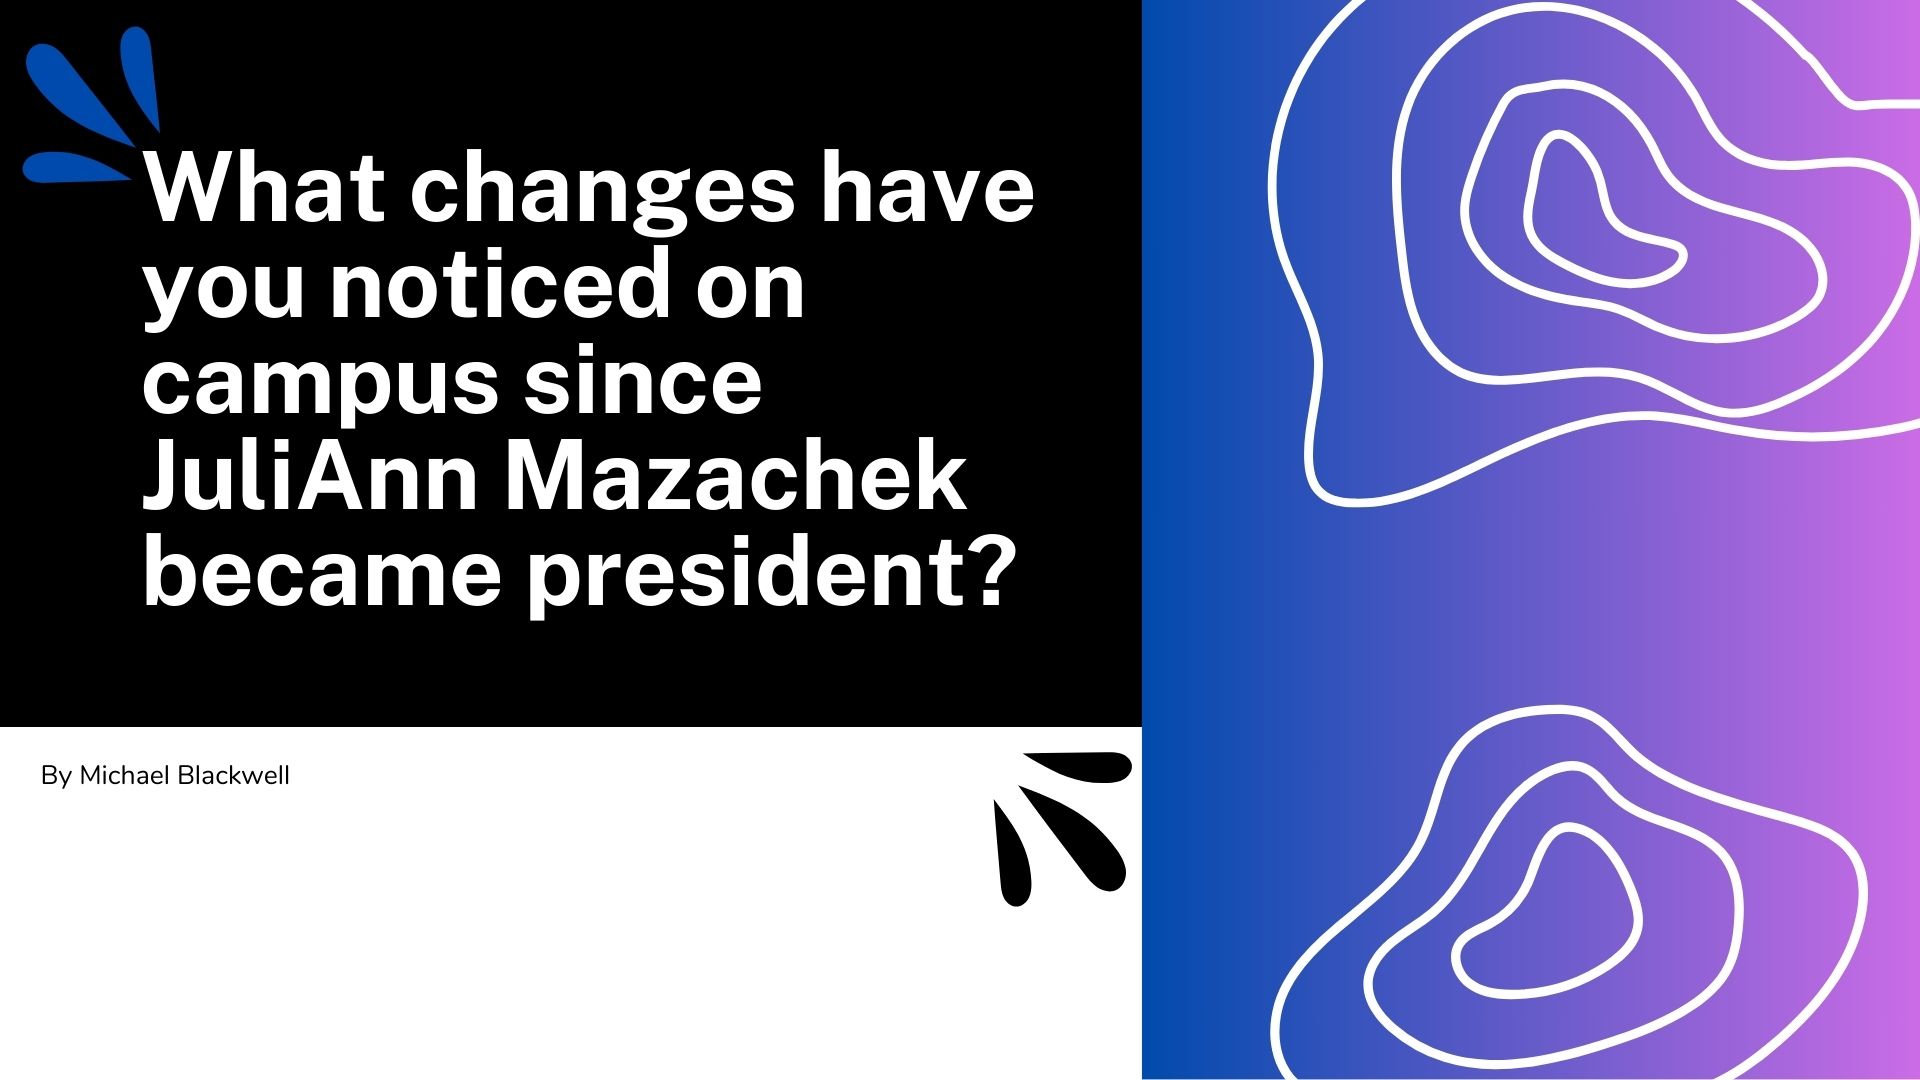 B.O.B: What changes have you noticed on campus since JuliAnn Mazachek became president?